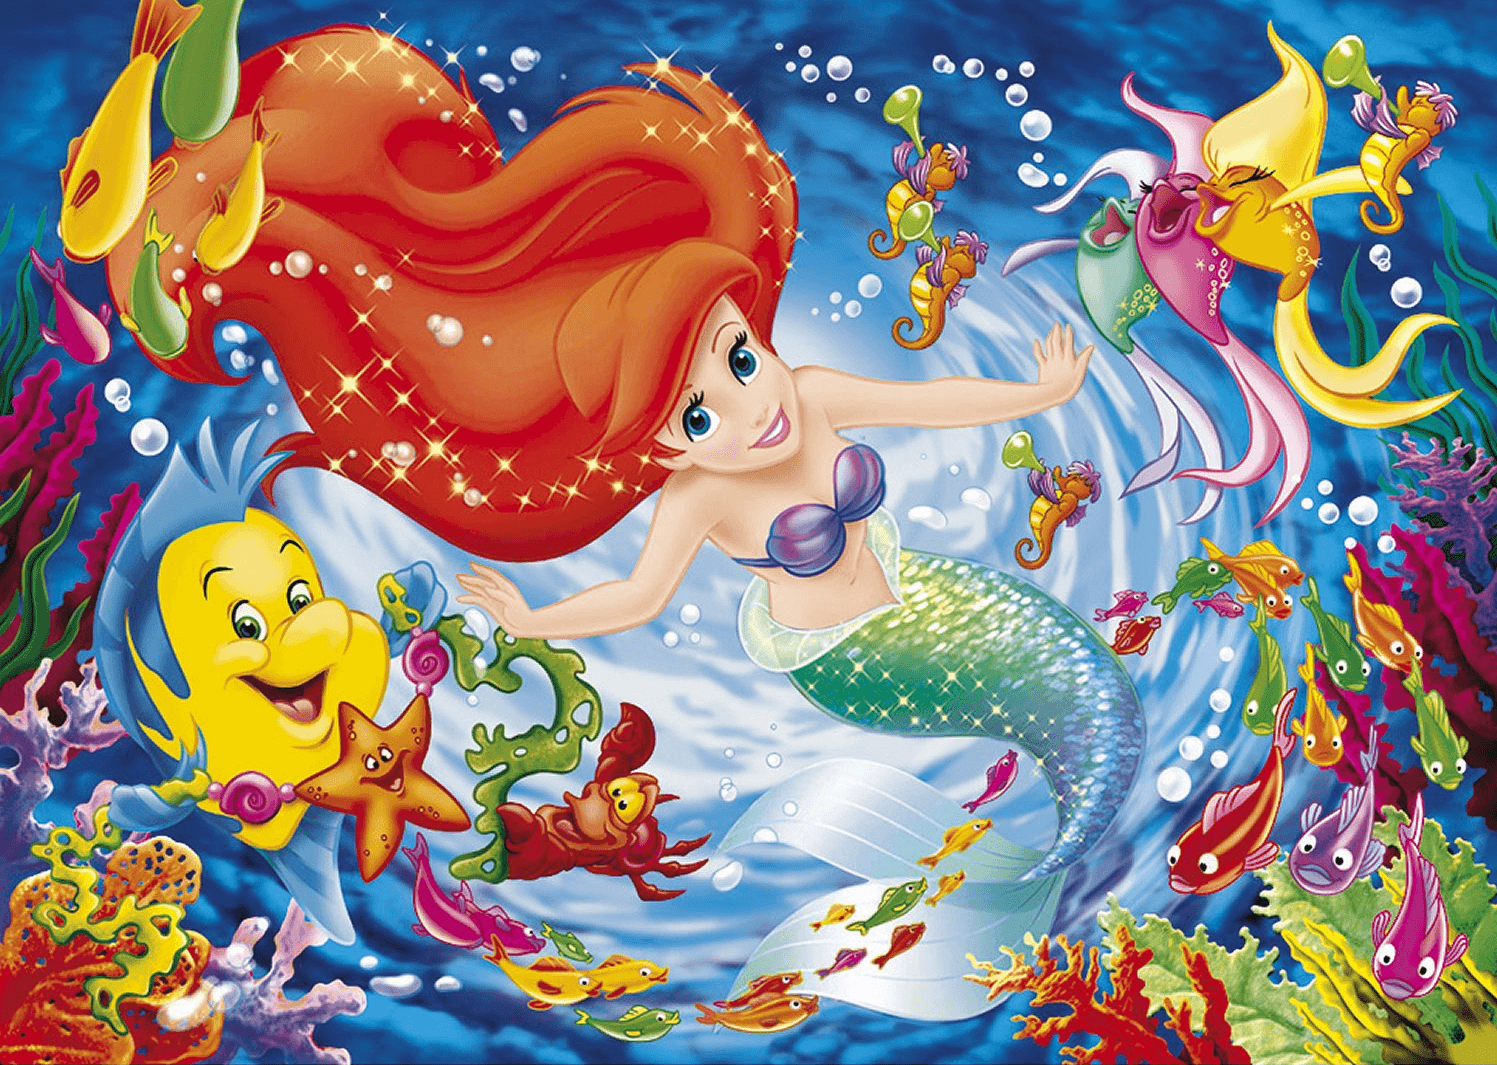 The Little Mermaid Ariel Wallpapers for FB Cover.